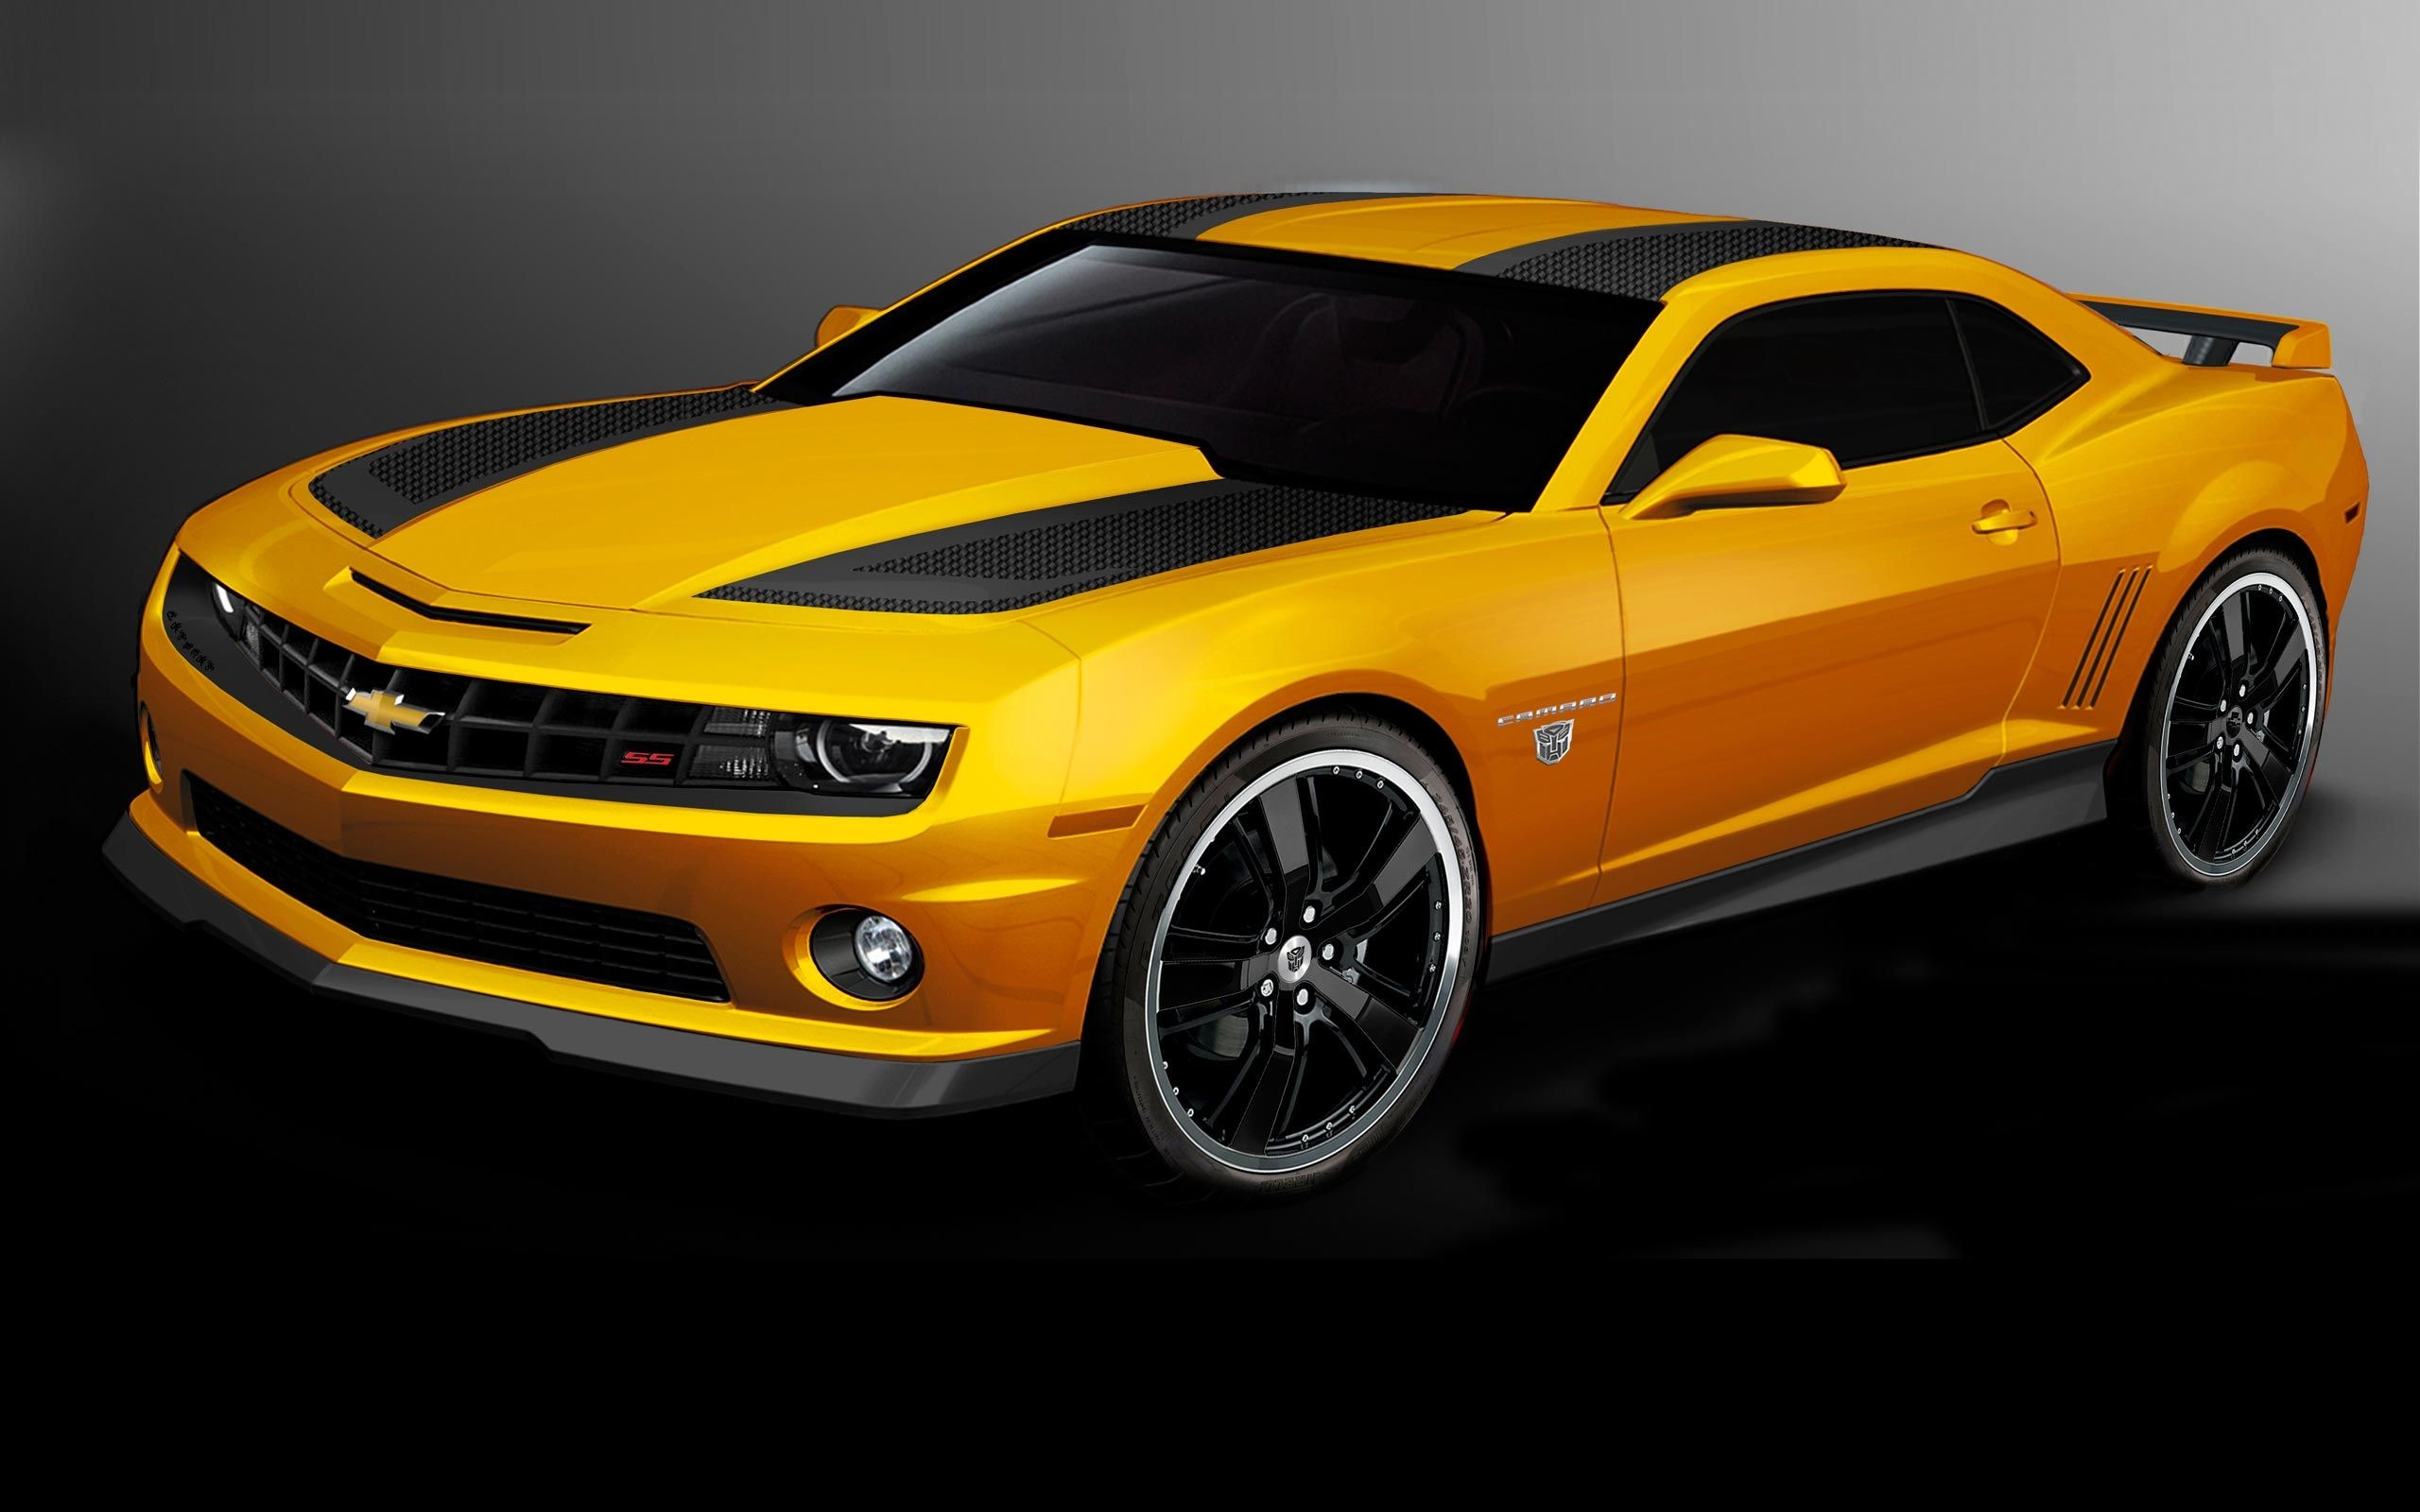 2560x1600 wallpaper.wiki-Awesome-Car-Wallpapers-For-Desktop-PIC-